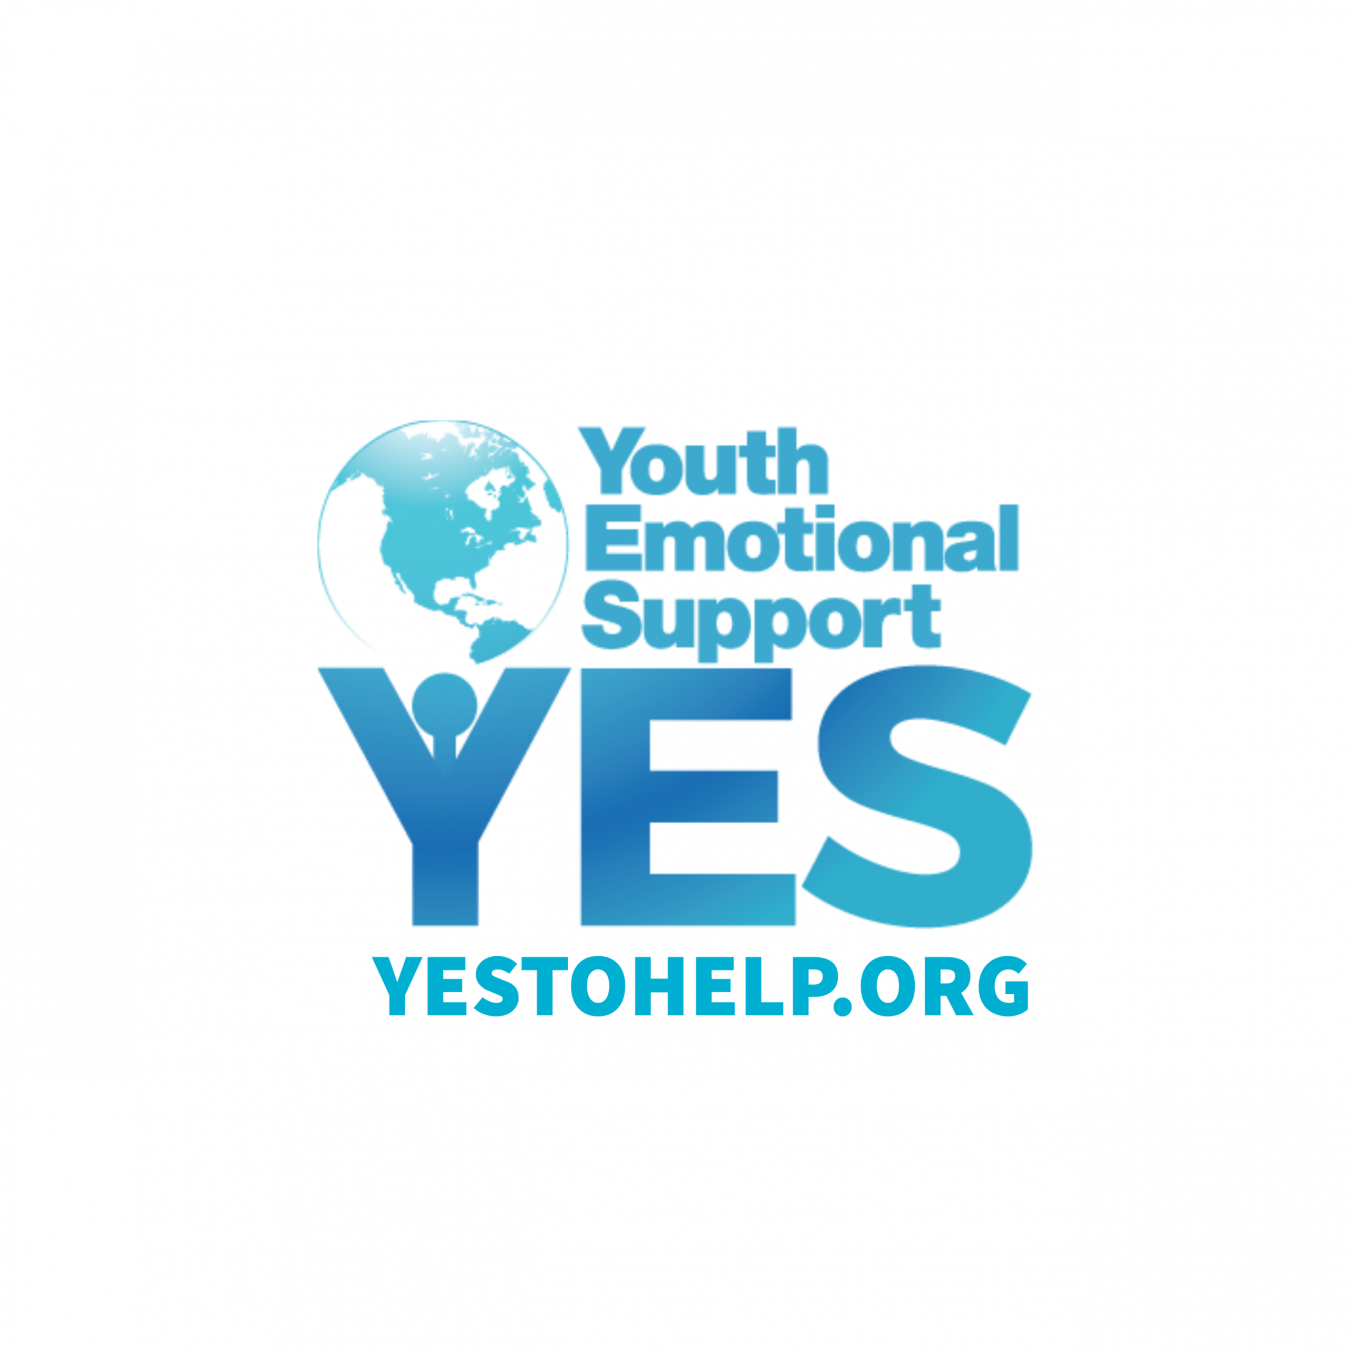 YES-Youth Emotional Support